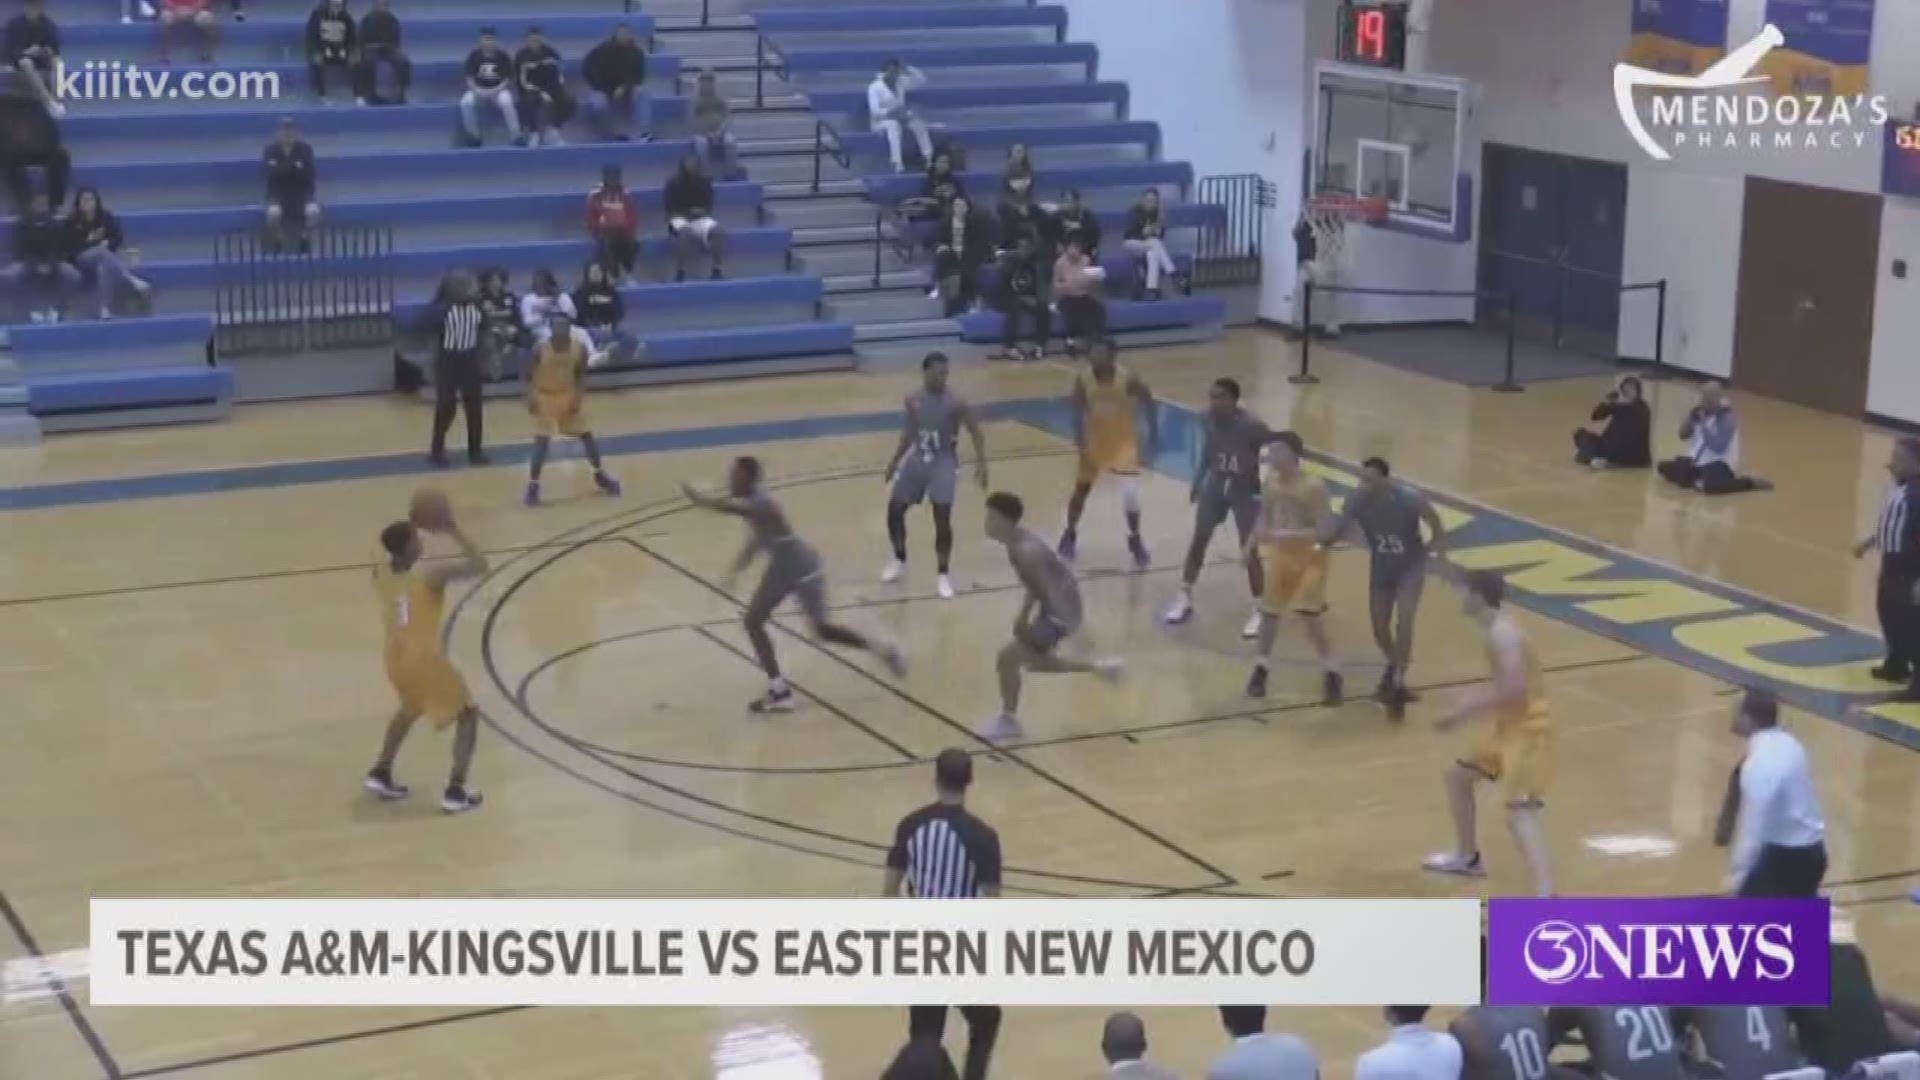 Texas A&M-Kingsville men's basketball tops ENMU and the women fall.